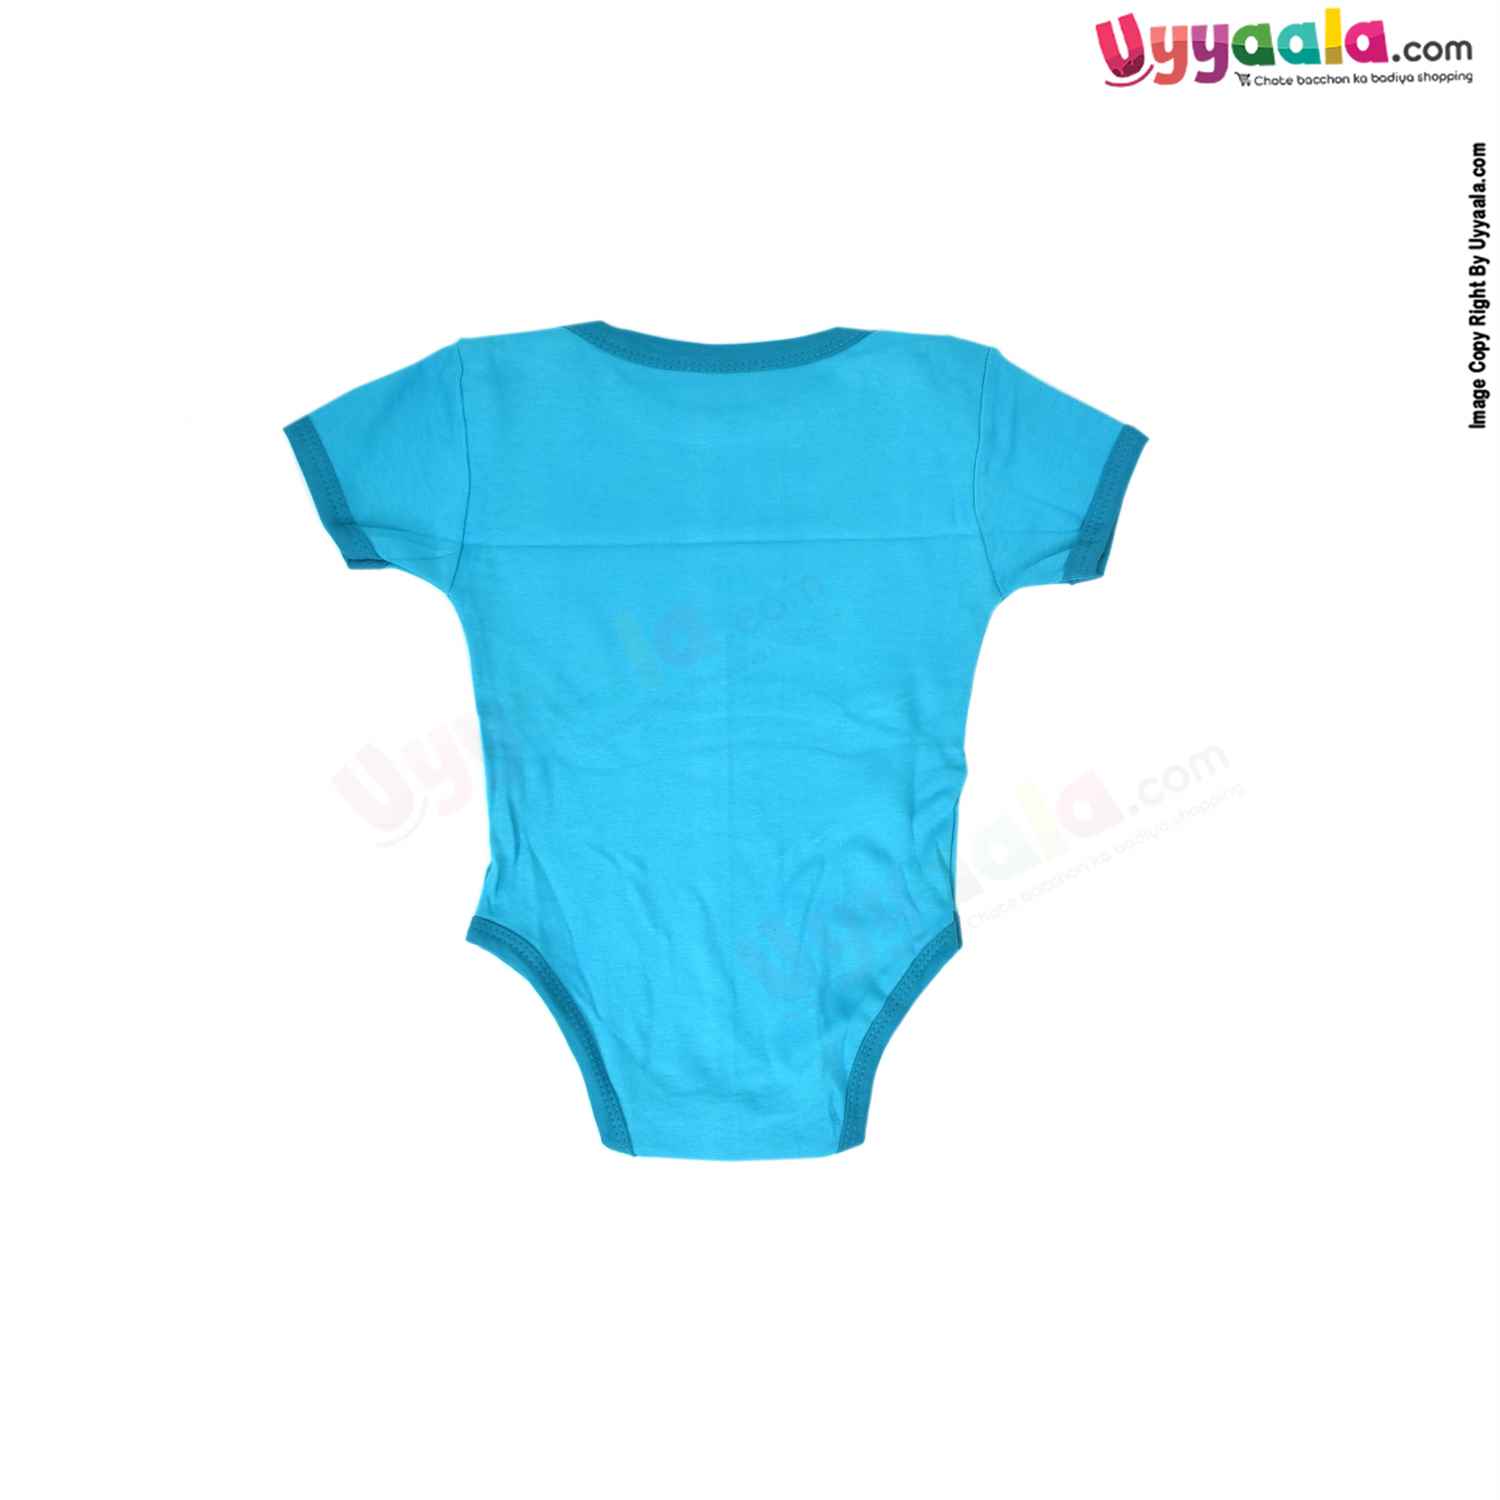 Precious One Short Sleeve Body Suit 100% Soft Hosiery Cotton - Green with Aeroplane Print (6-9M)